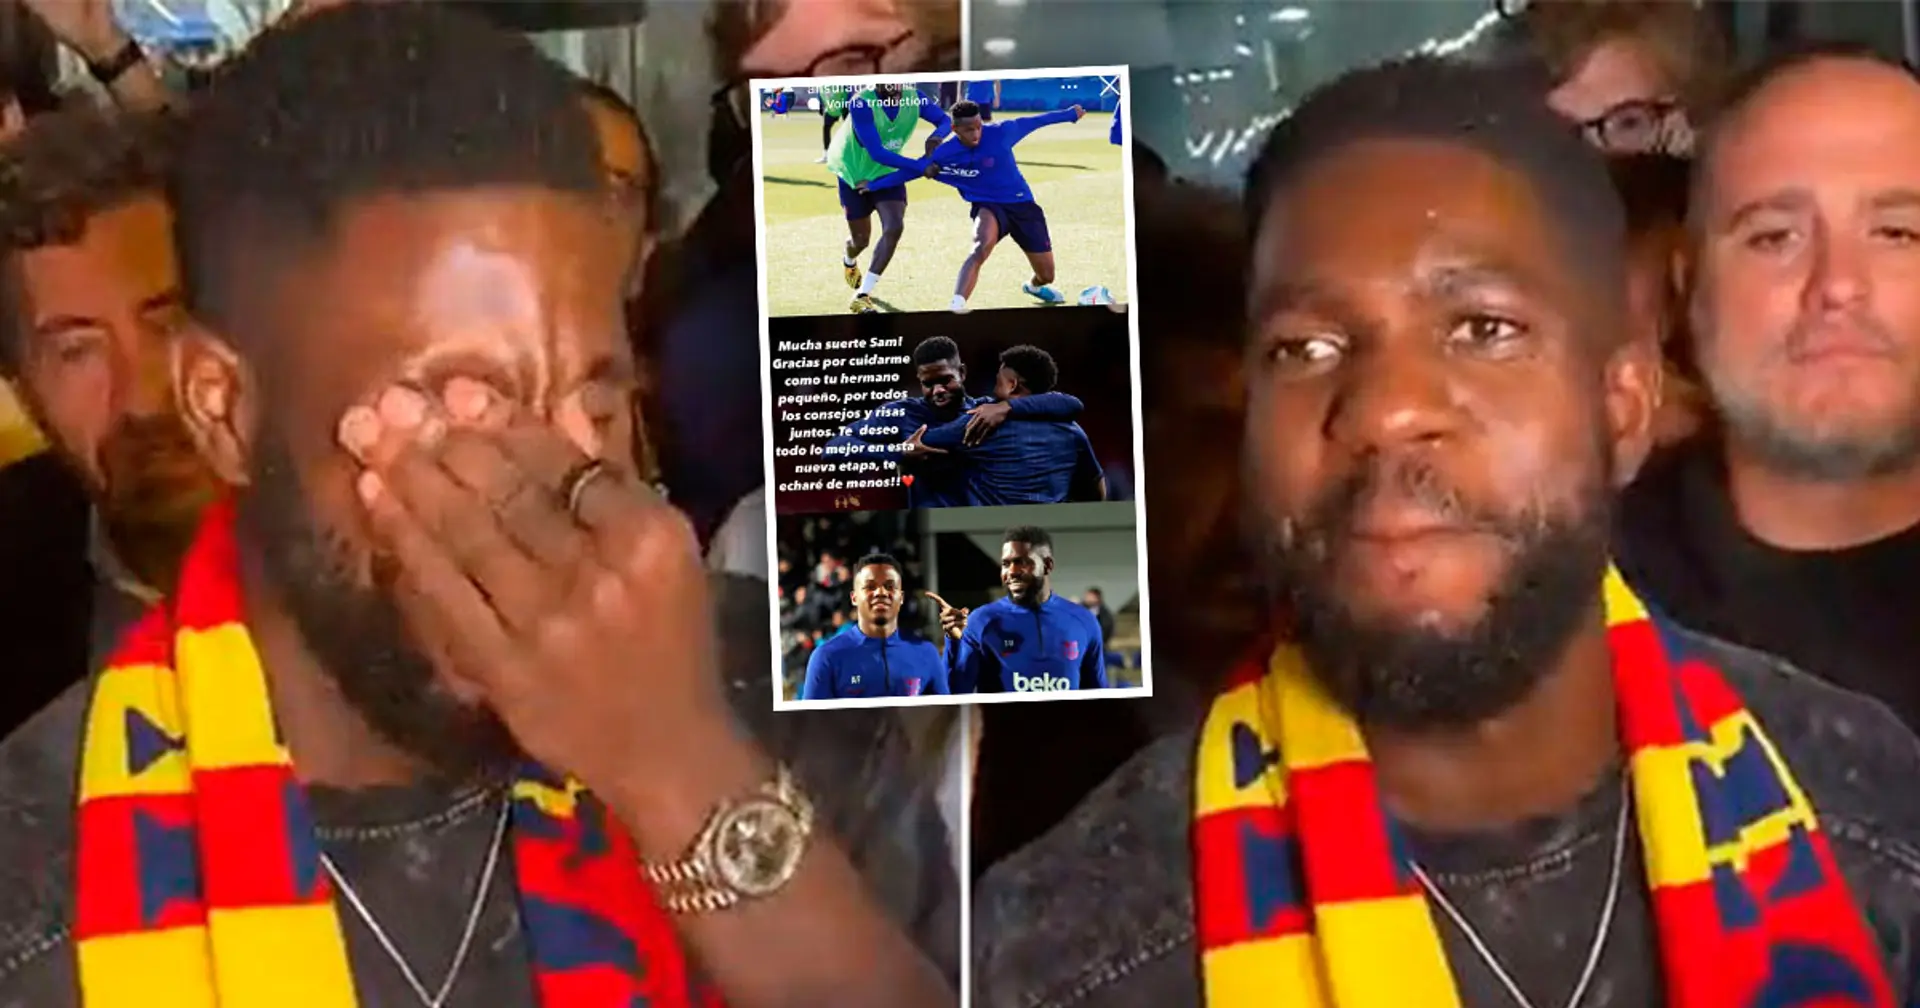 'Took care of me as if I were your little brother': Ansu Fati sends touching message to Umtiti